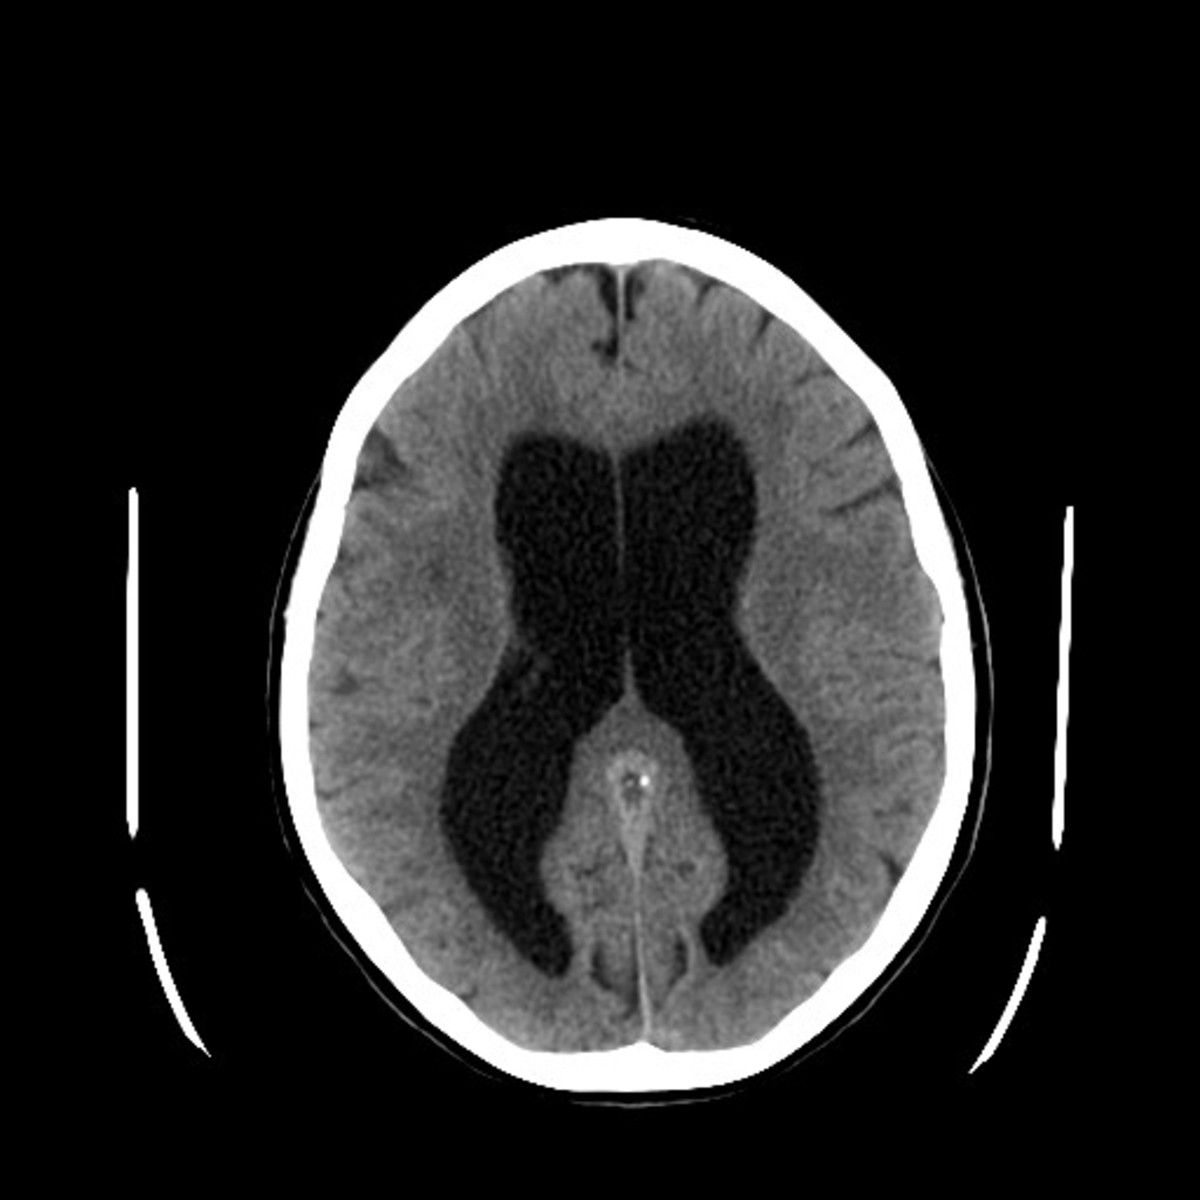 Hydrocephalus, an accumulation of cerebrospinal fluid, can accompany SBS. CT scanning is one technique used to diagnose the condition. (Photo: Lucien Monfils/Wikimedia Commons)